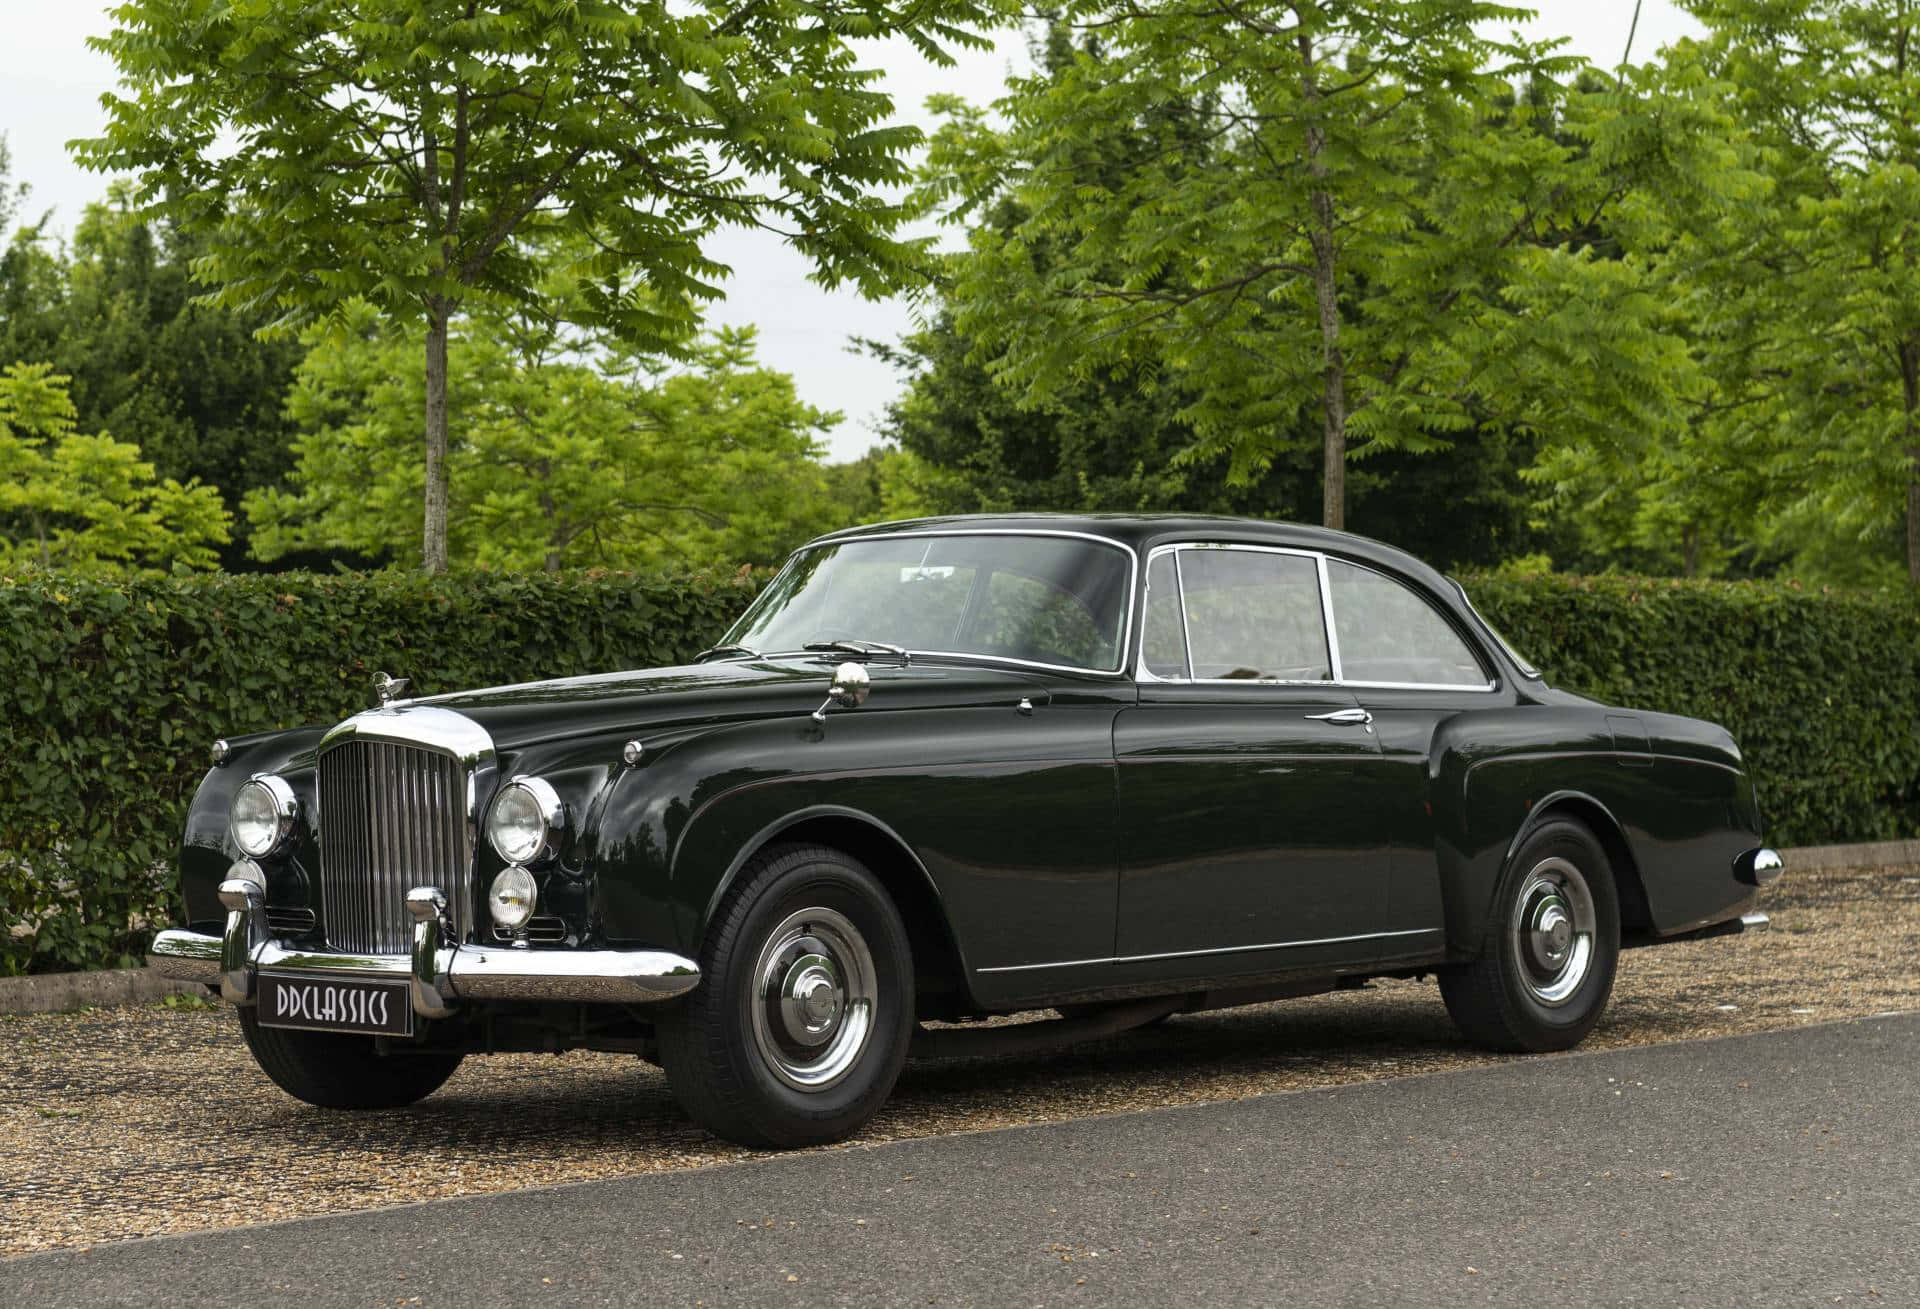 Vintage Bentley S2 luxuriously parked Wallpaper